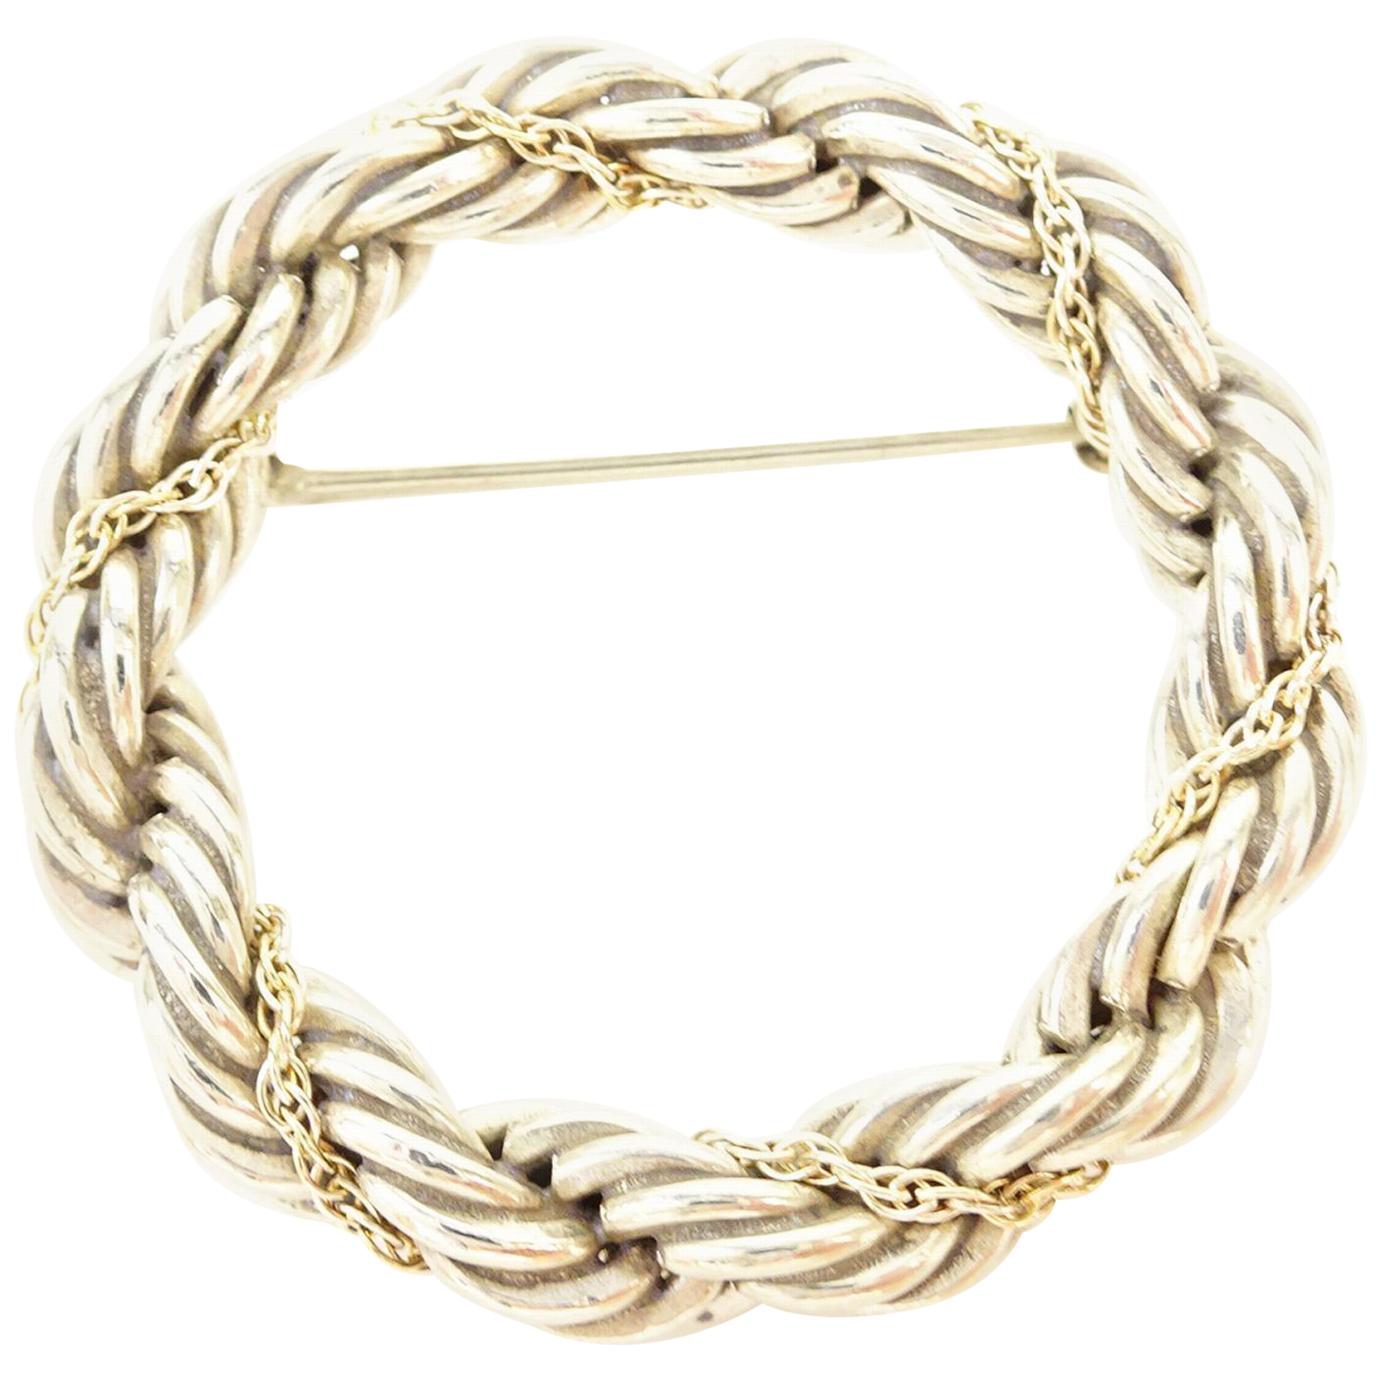 Tiffany & Co. Sterling Silver Gold Chain Braided Lapel Pin Brooch 